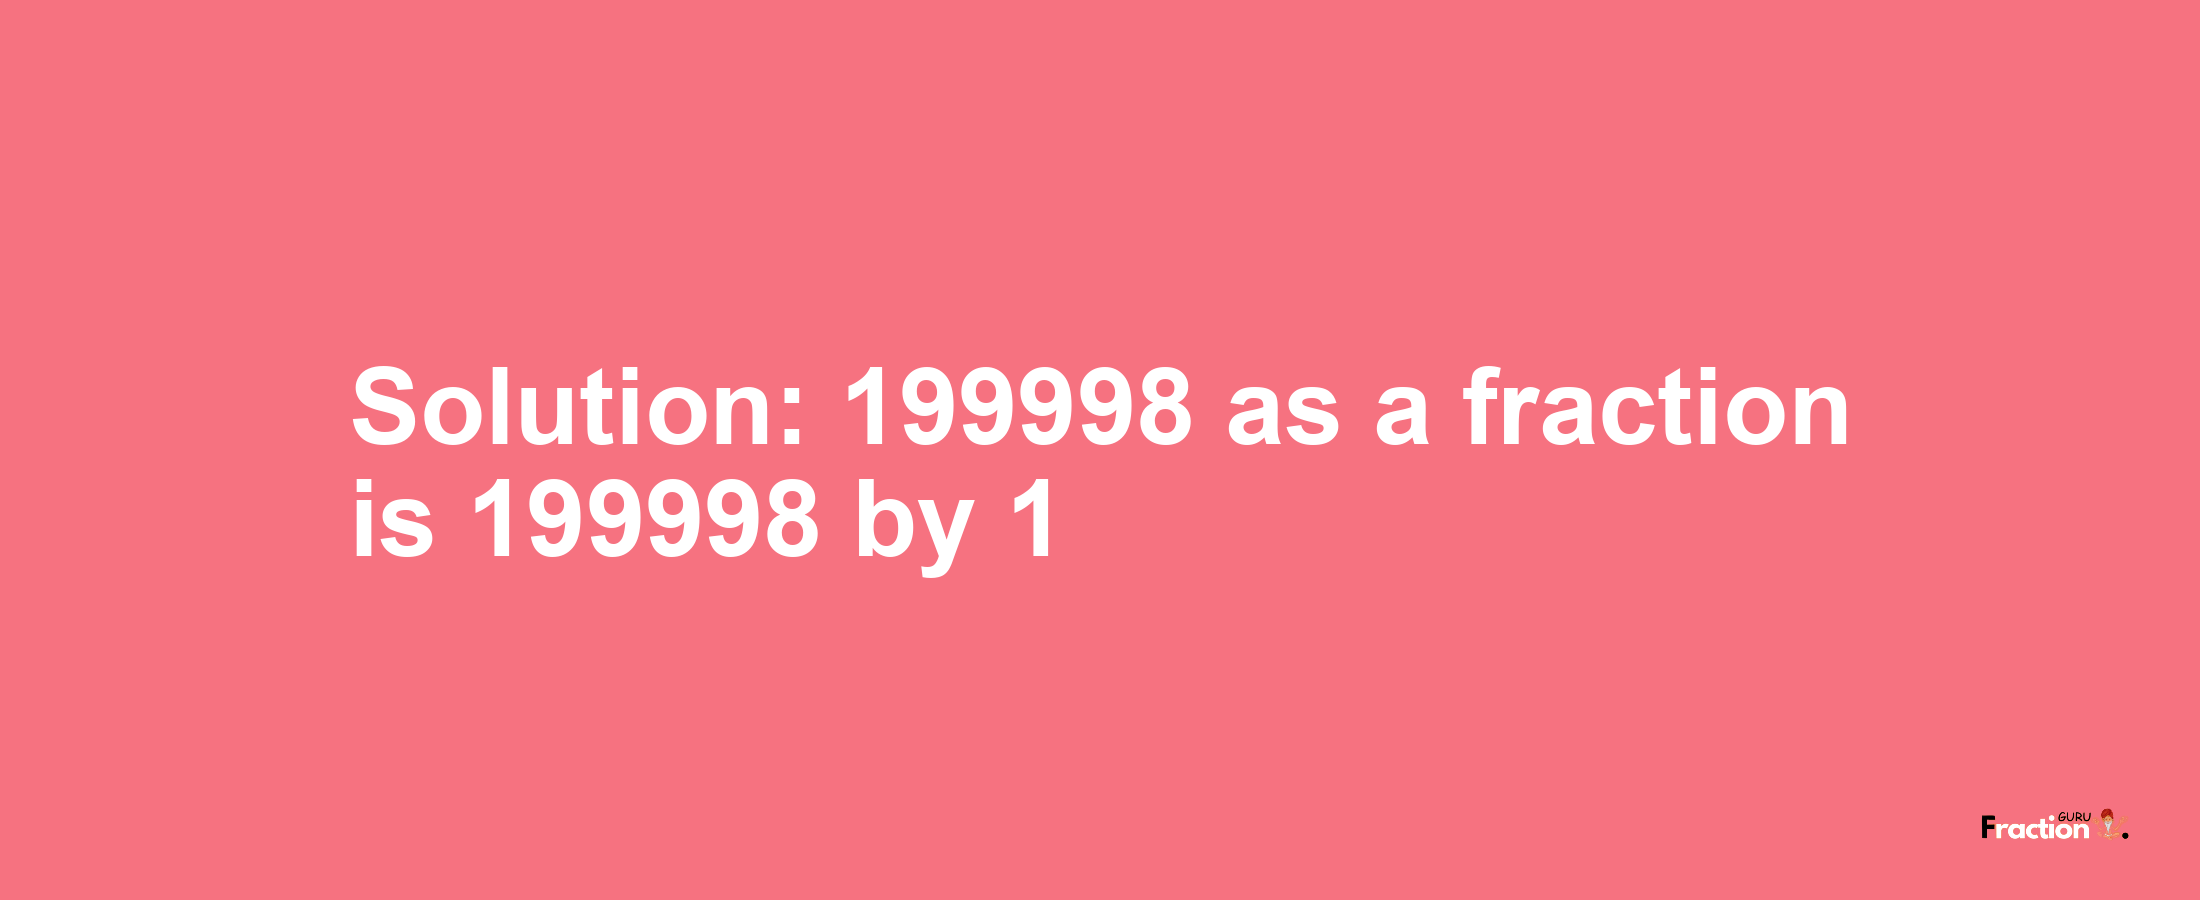 Solution:199998 as a fraction is 199998/1